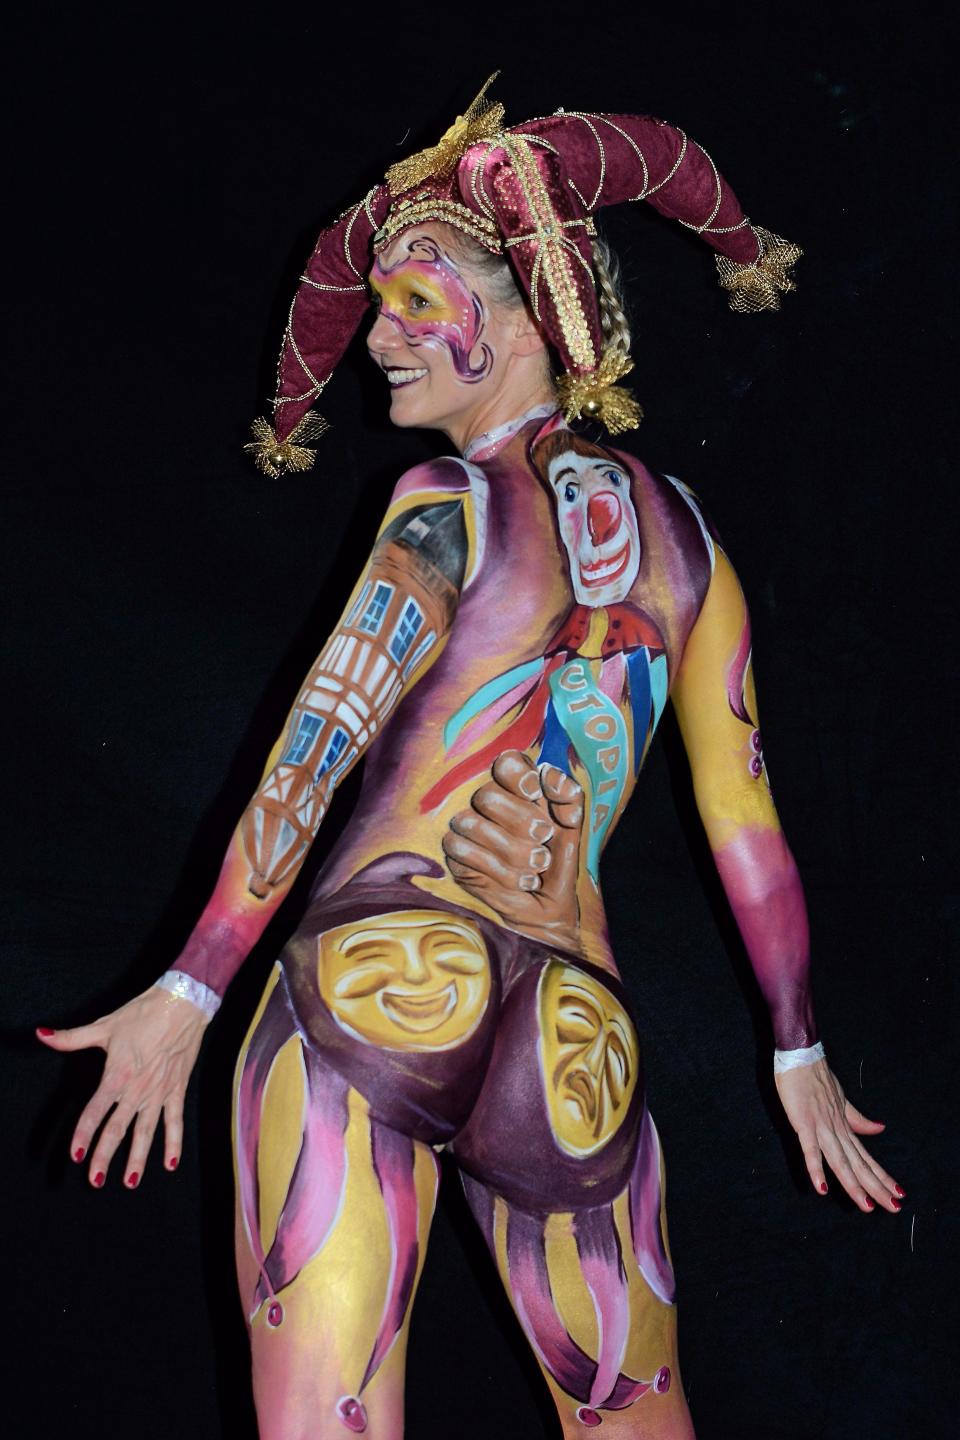 Nude models pose for world bodypainting festival